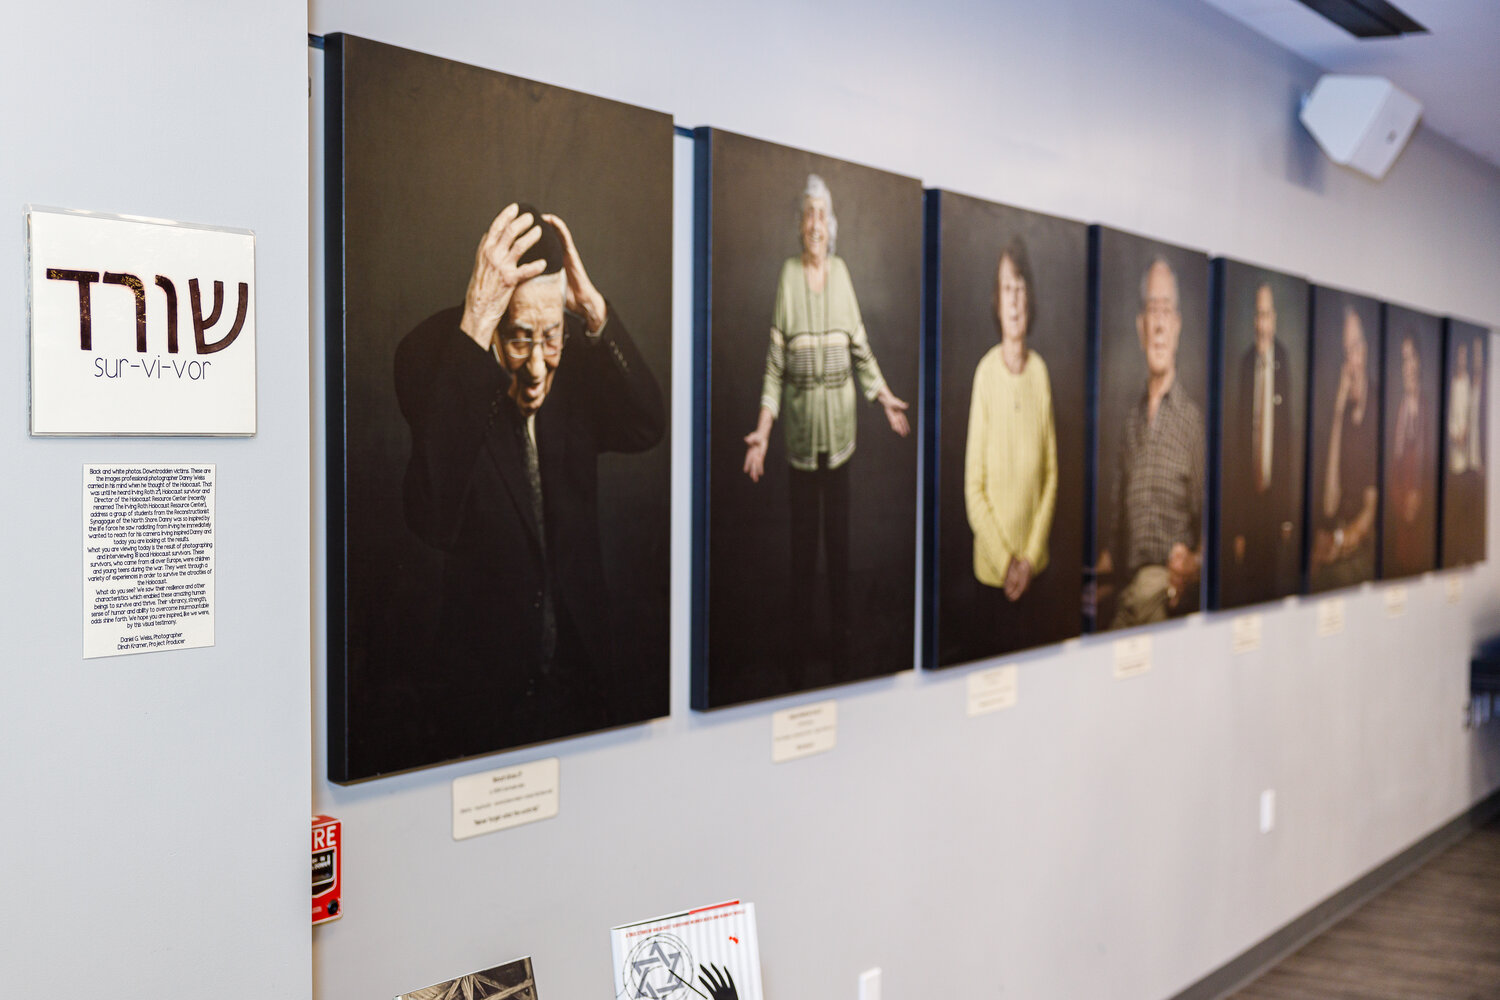 Through the end of November, the Merrick Library is hosting ‘Portraits of Survivors,’18 photographs of Holocaust survivors.